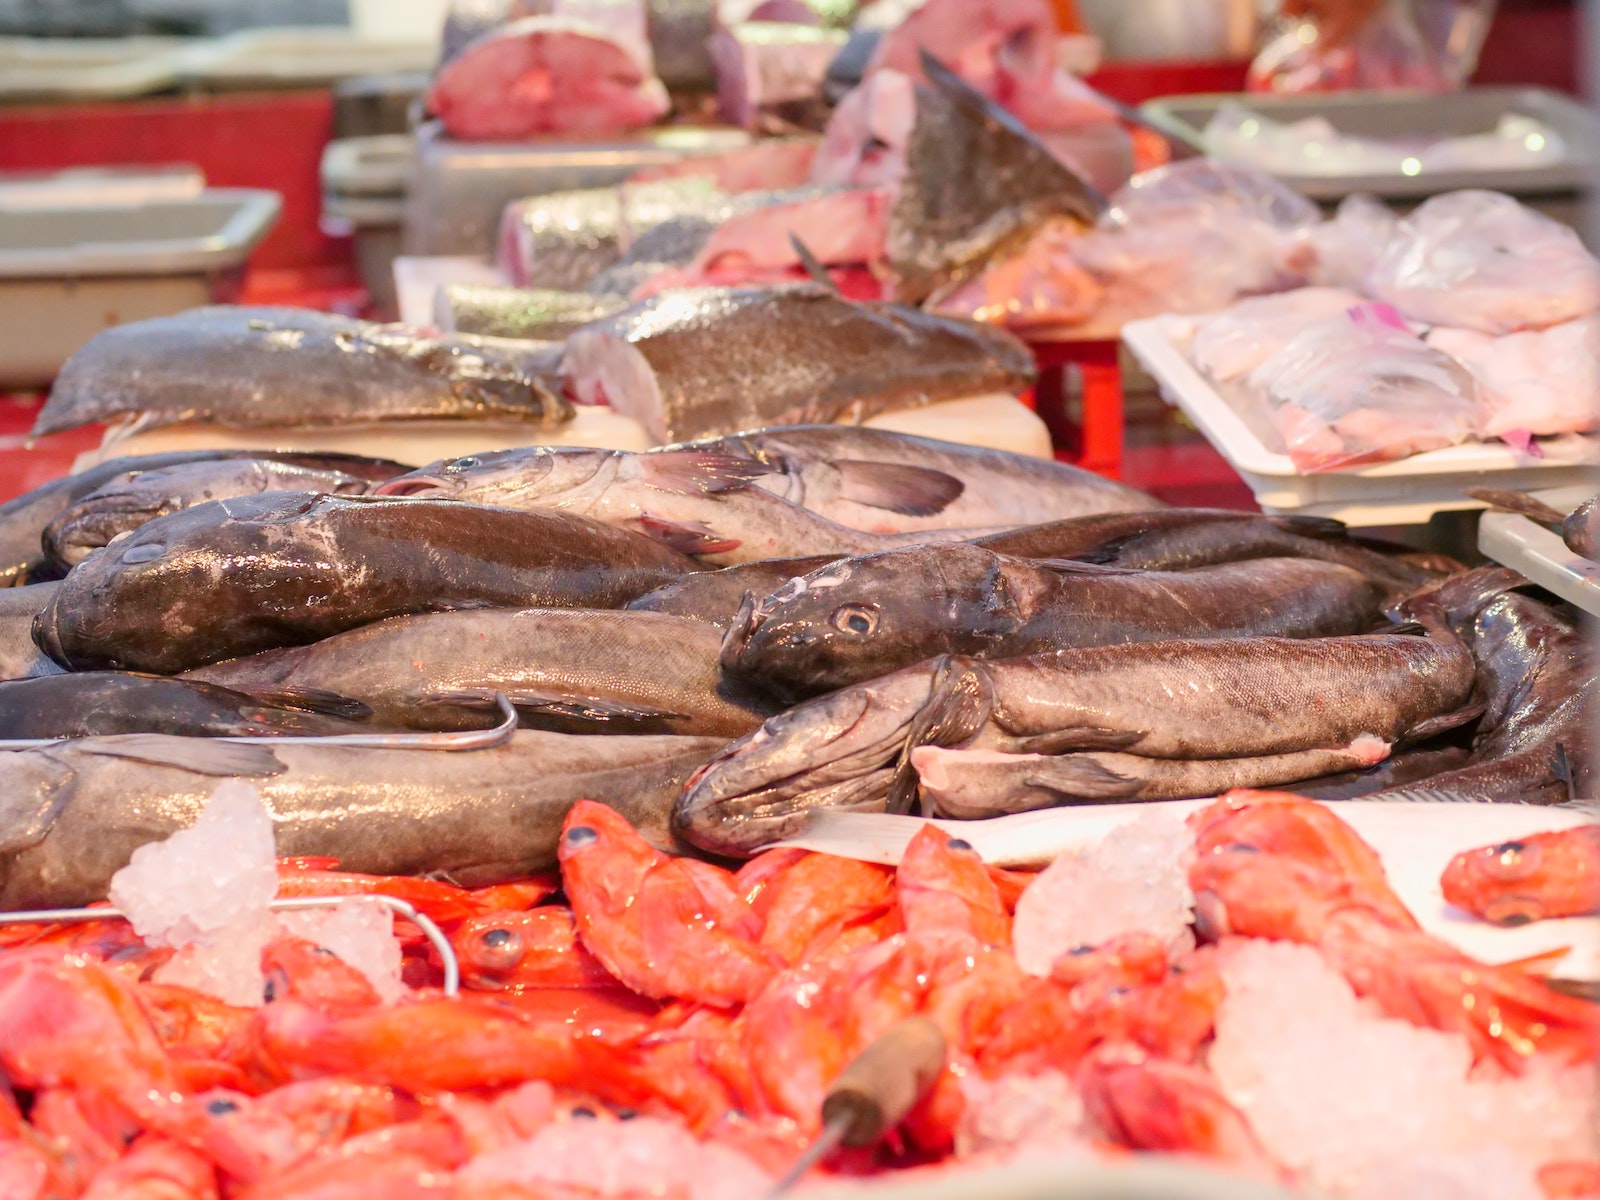 several different kinds of fish on ice at the market